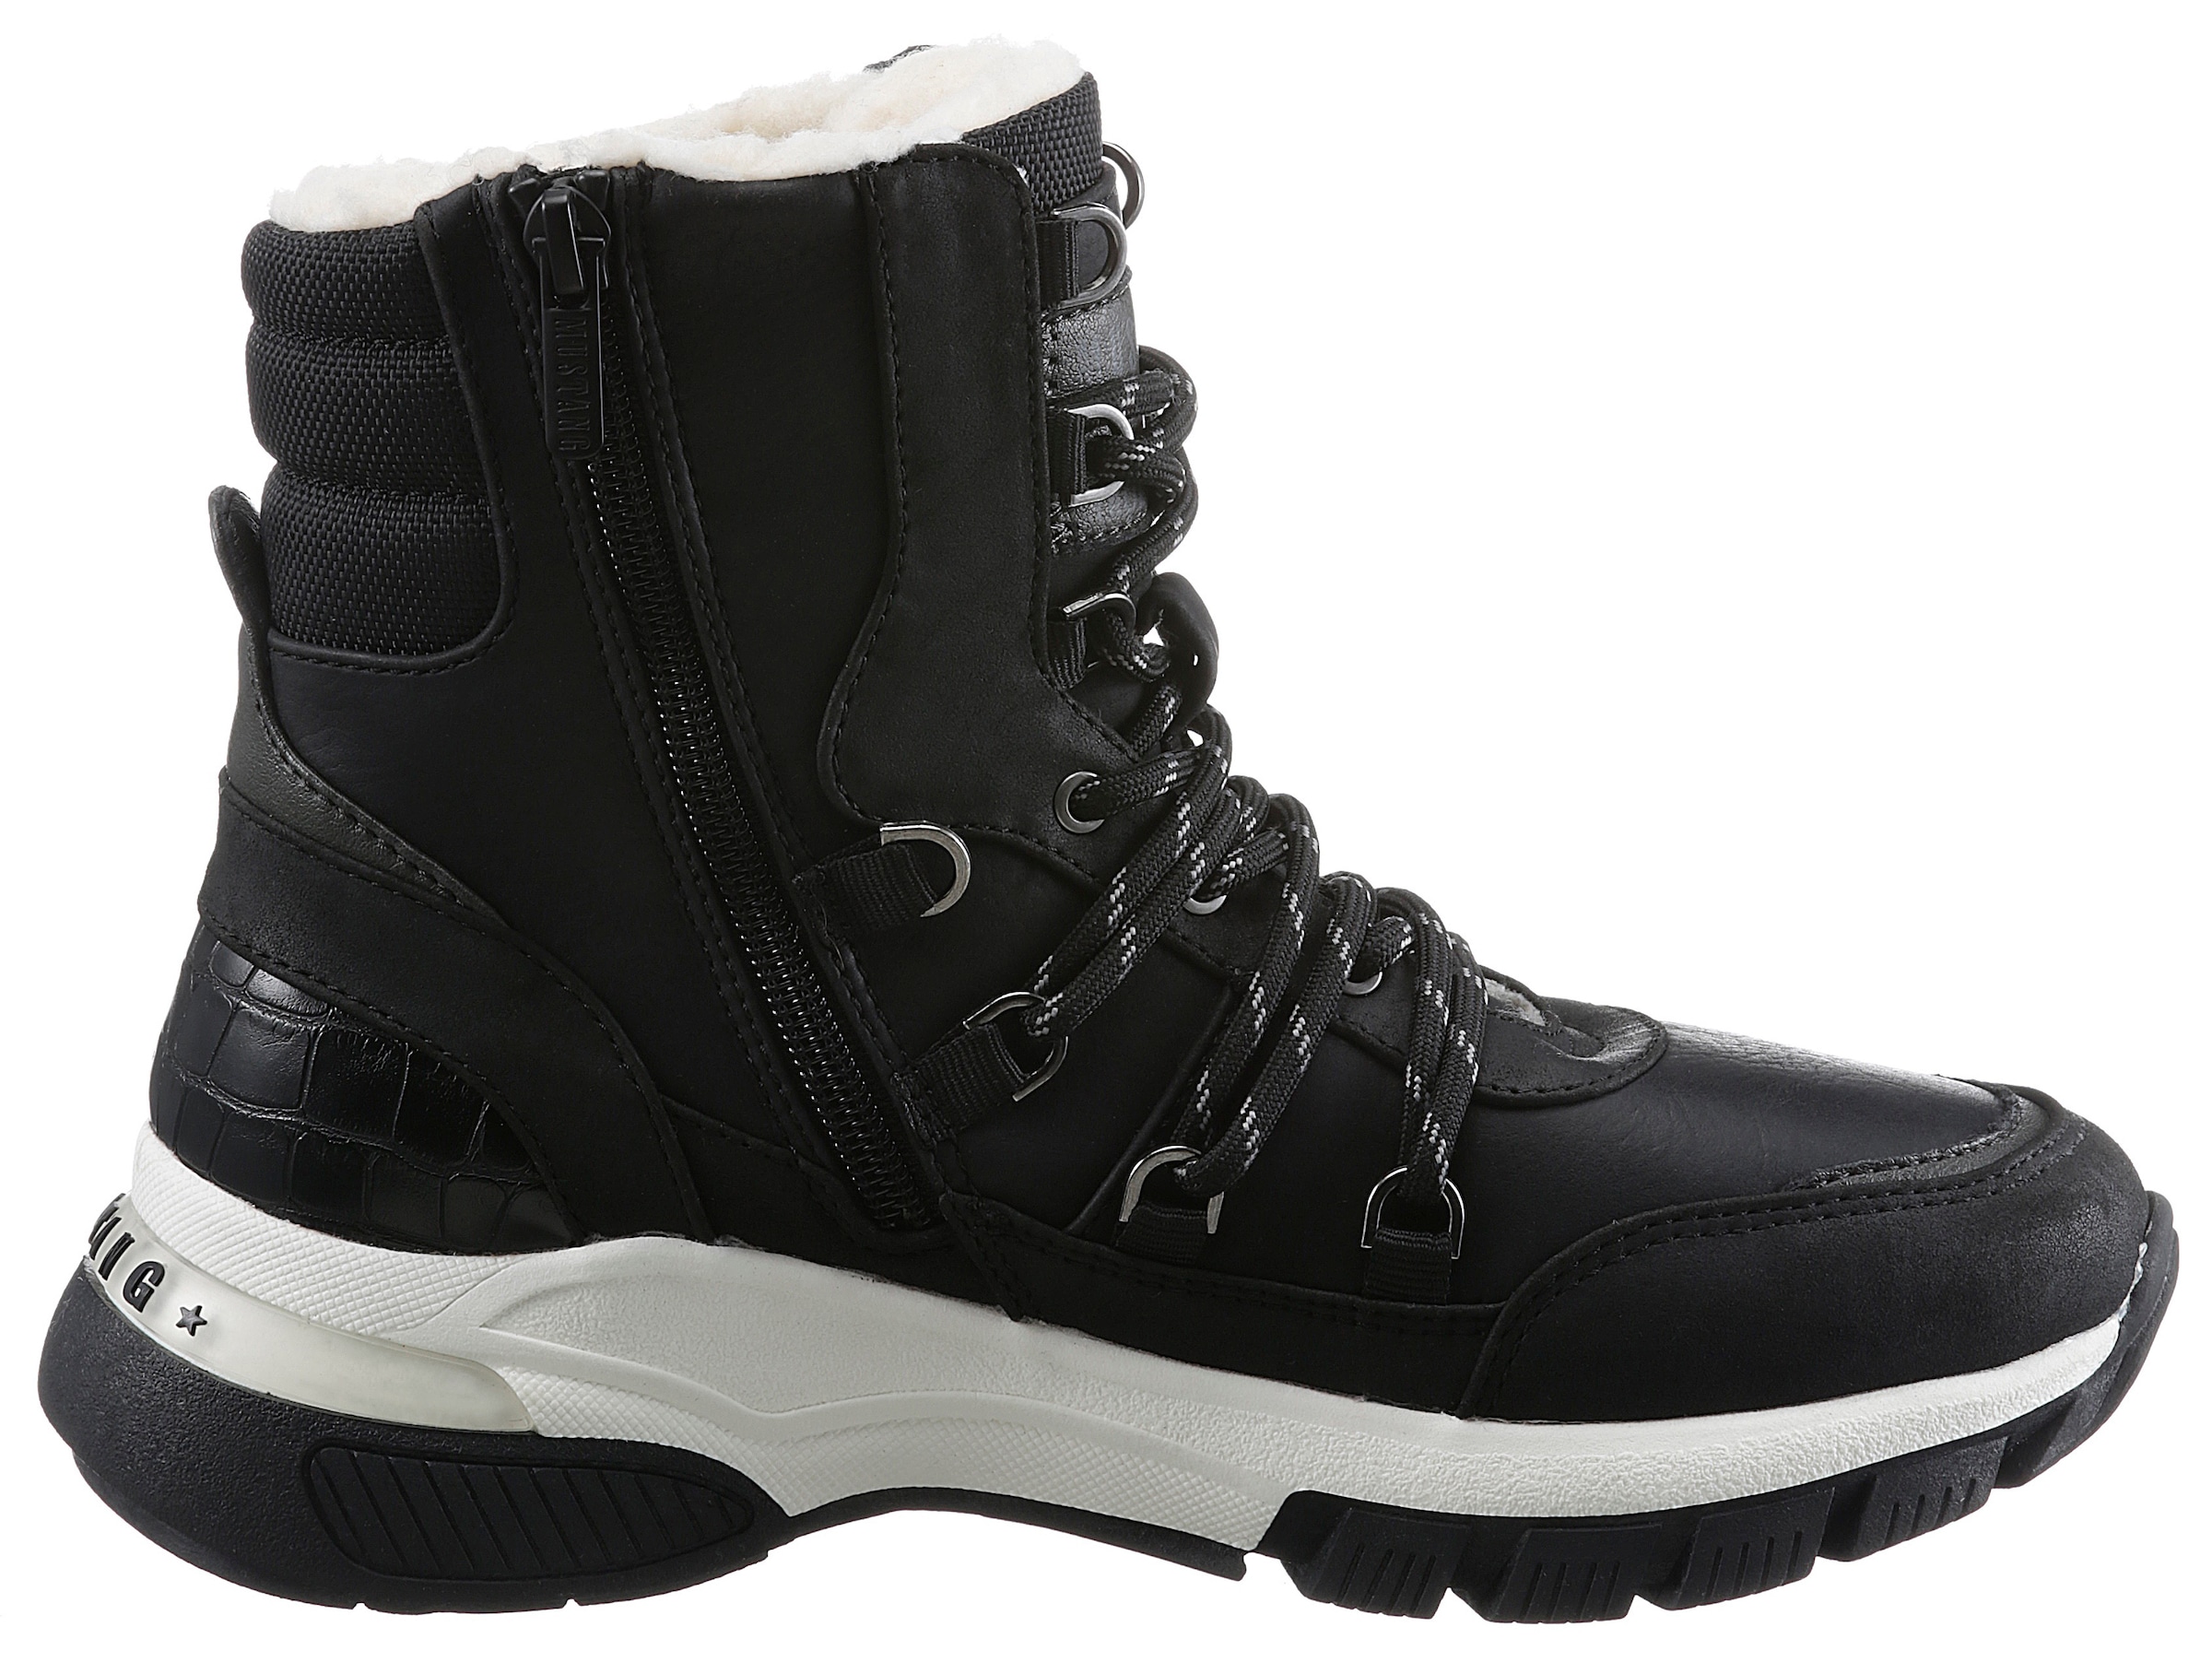 Mustang Shoes Winterboots, mit zweifarbiger Laufsohle